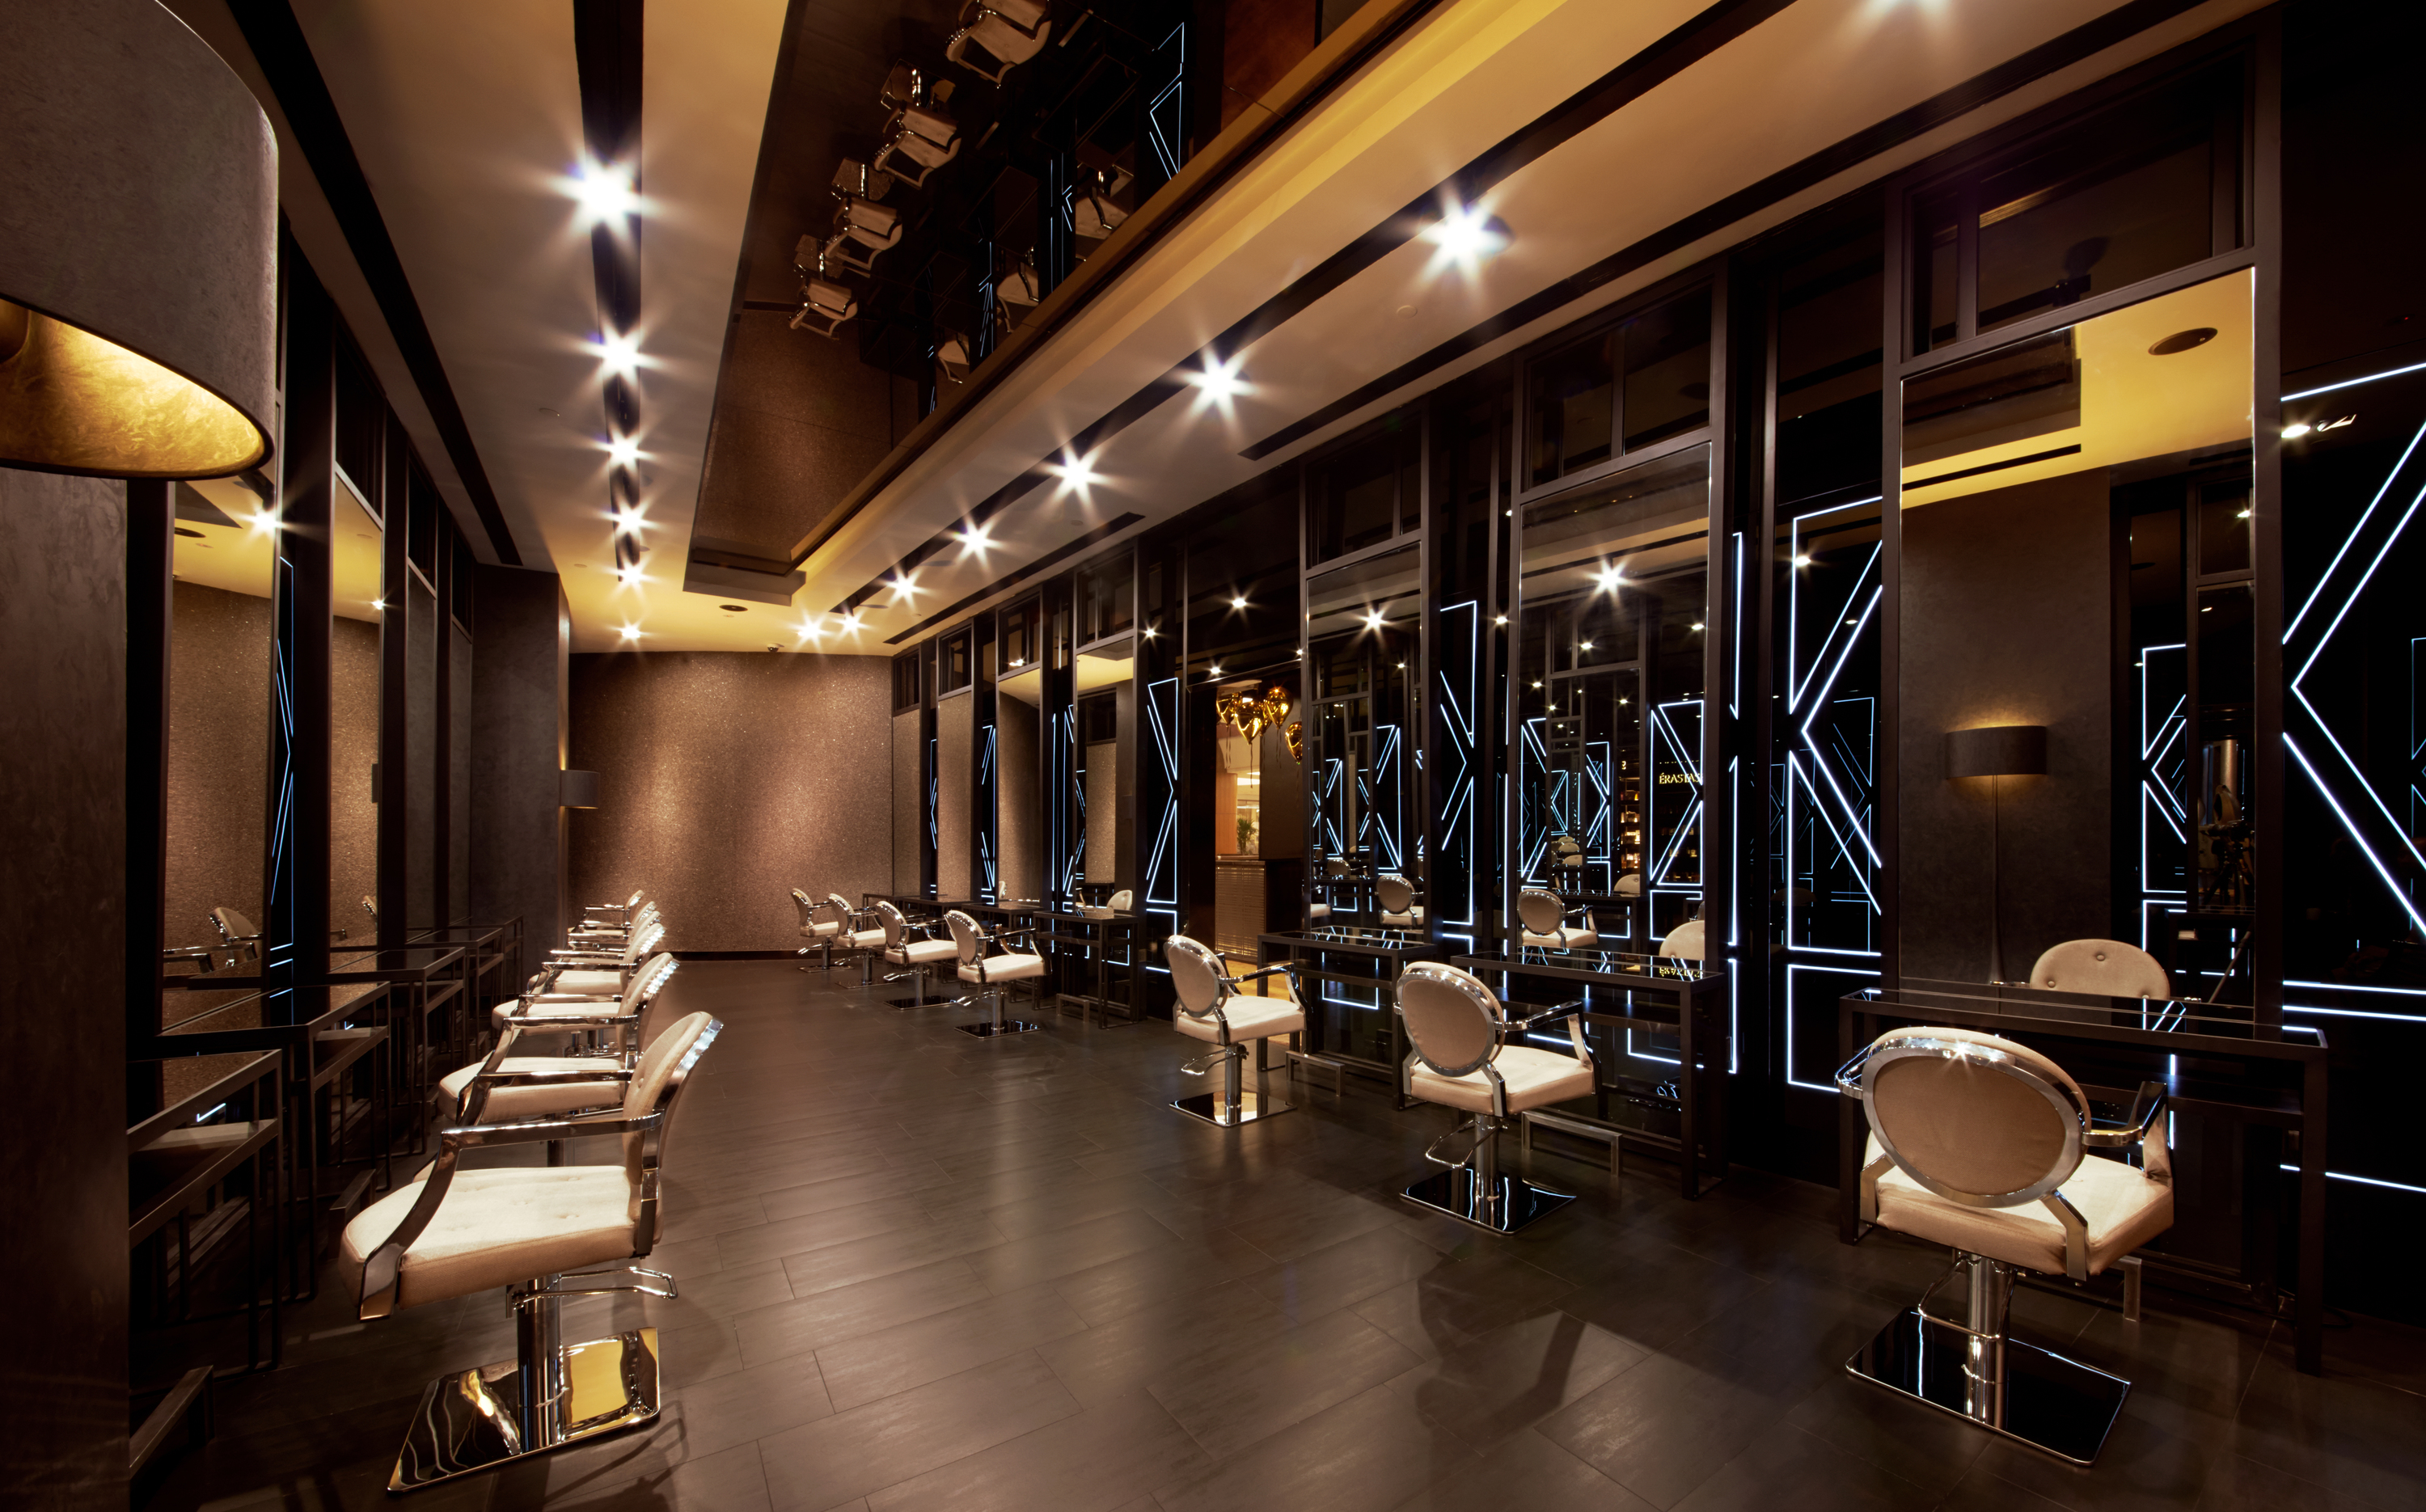 Kuala Lumpur's best hair salons for a wash and blow